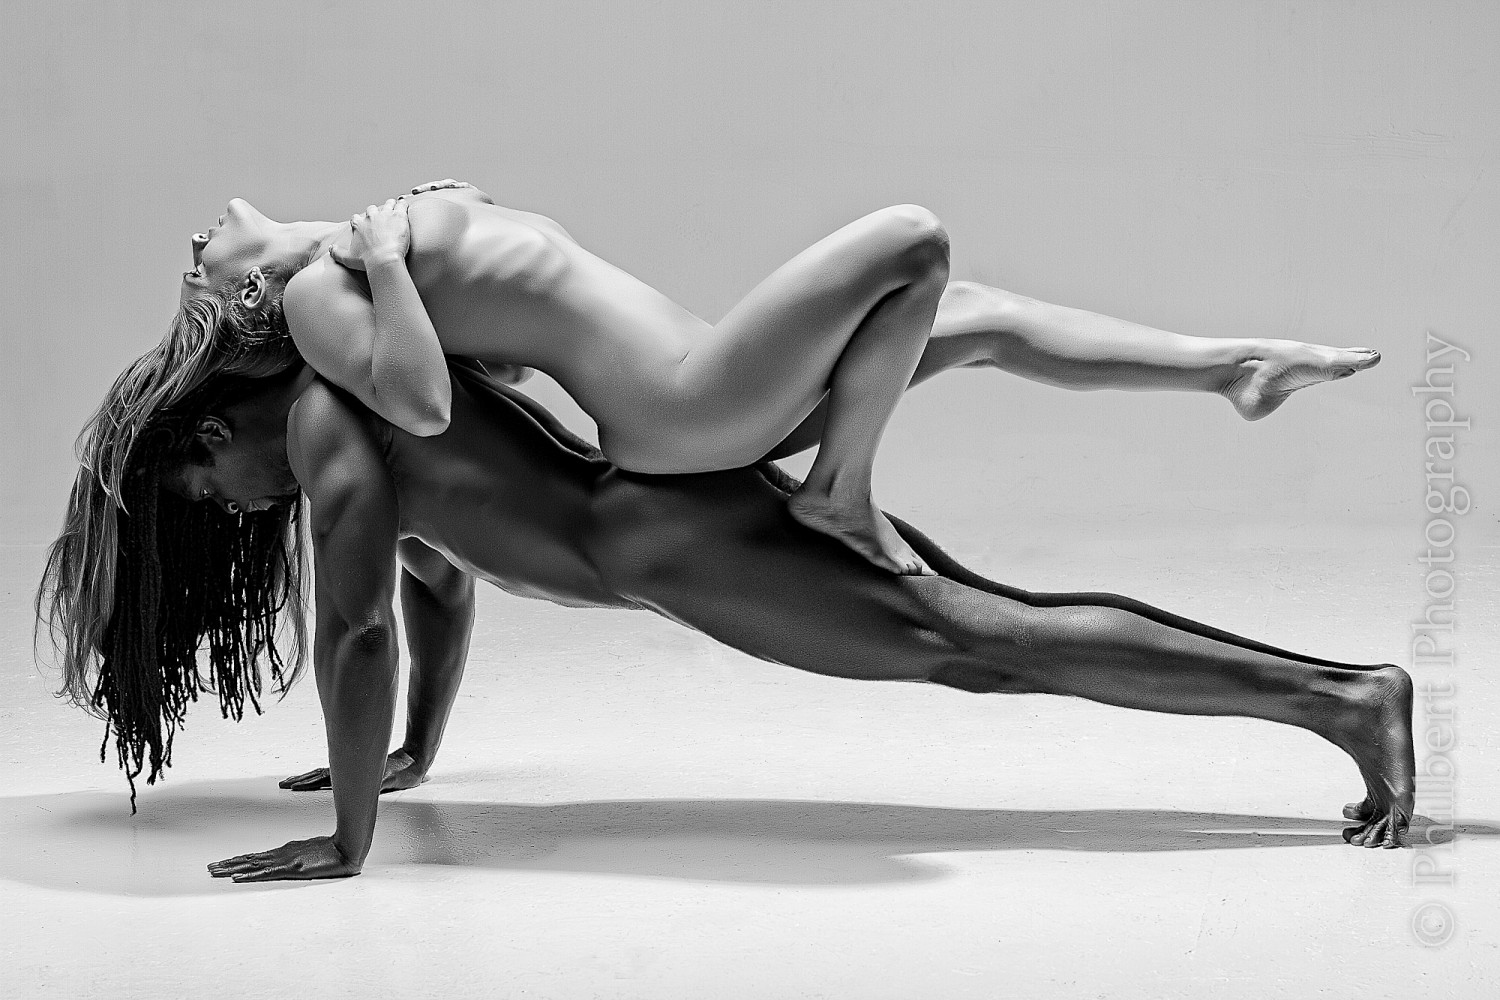 Permalink to 40+ Fine Art Nude Photos that Celebrate All Body Types (NSFW)....